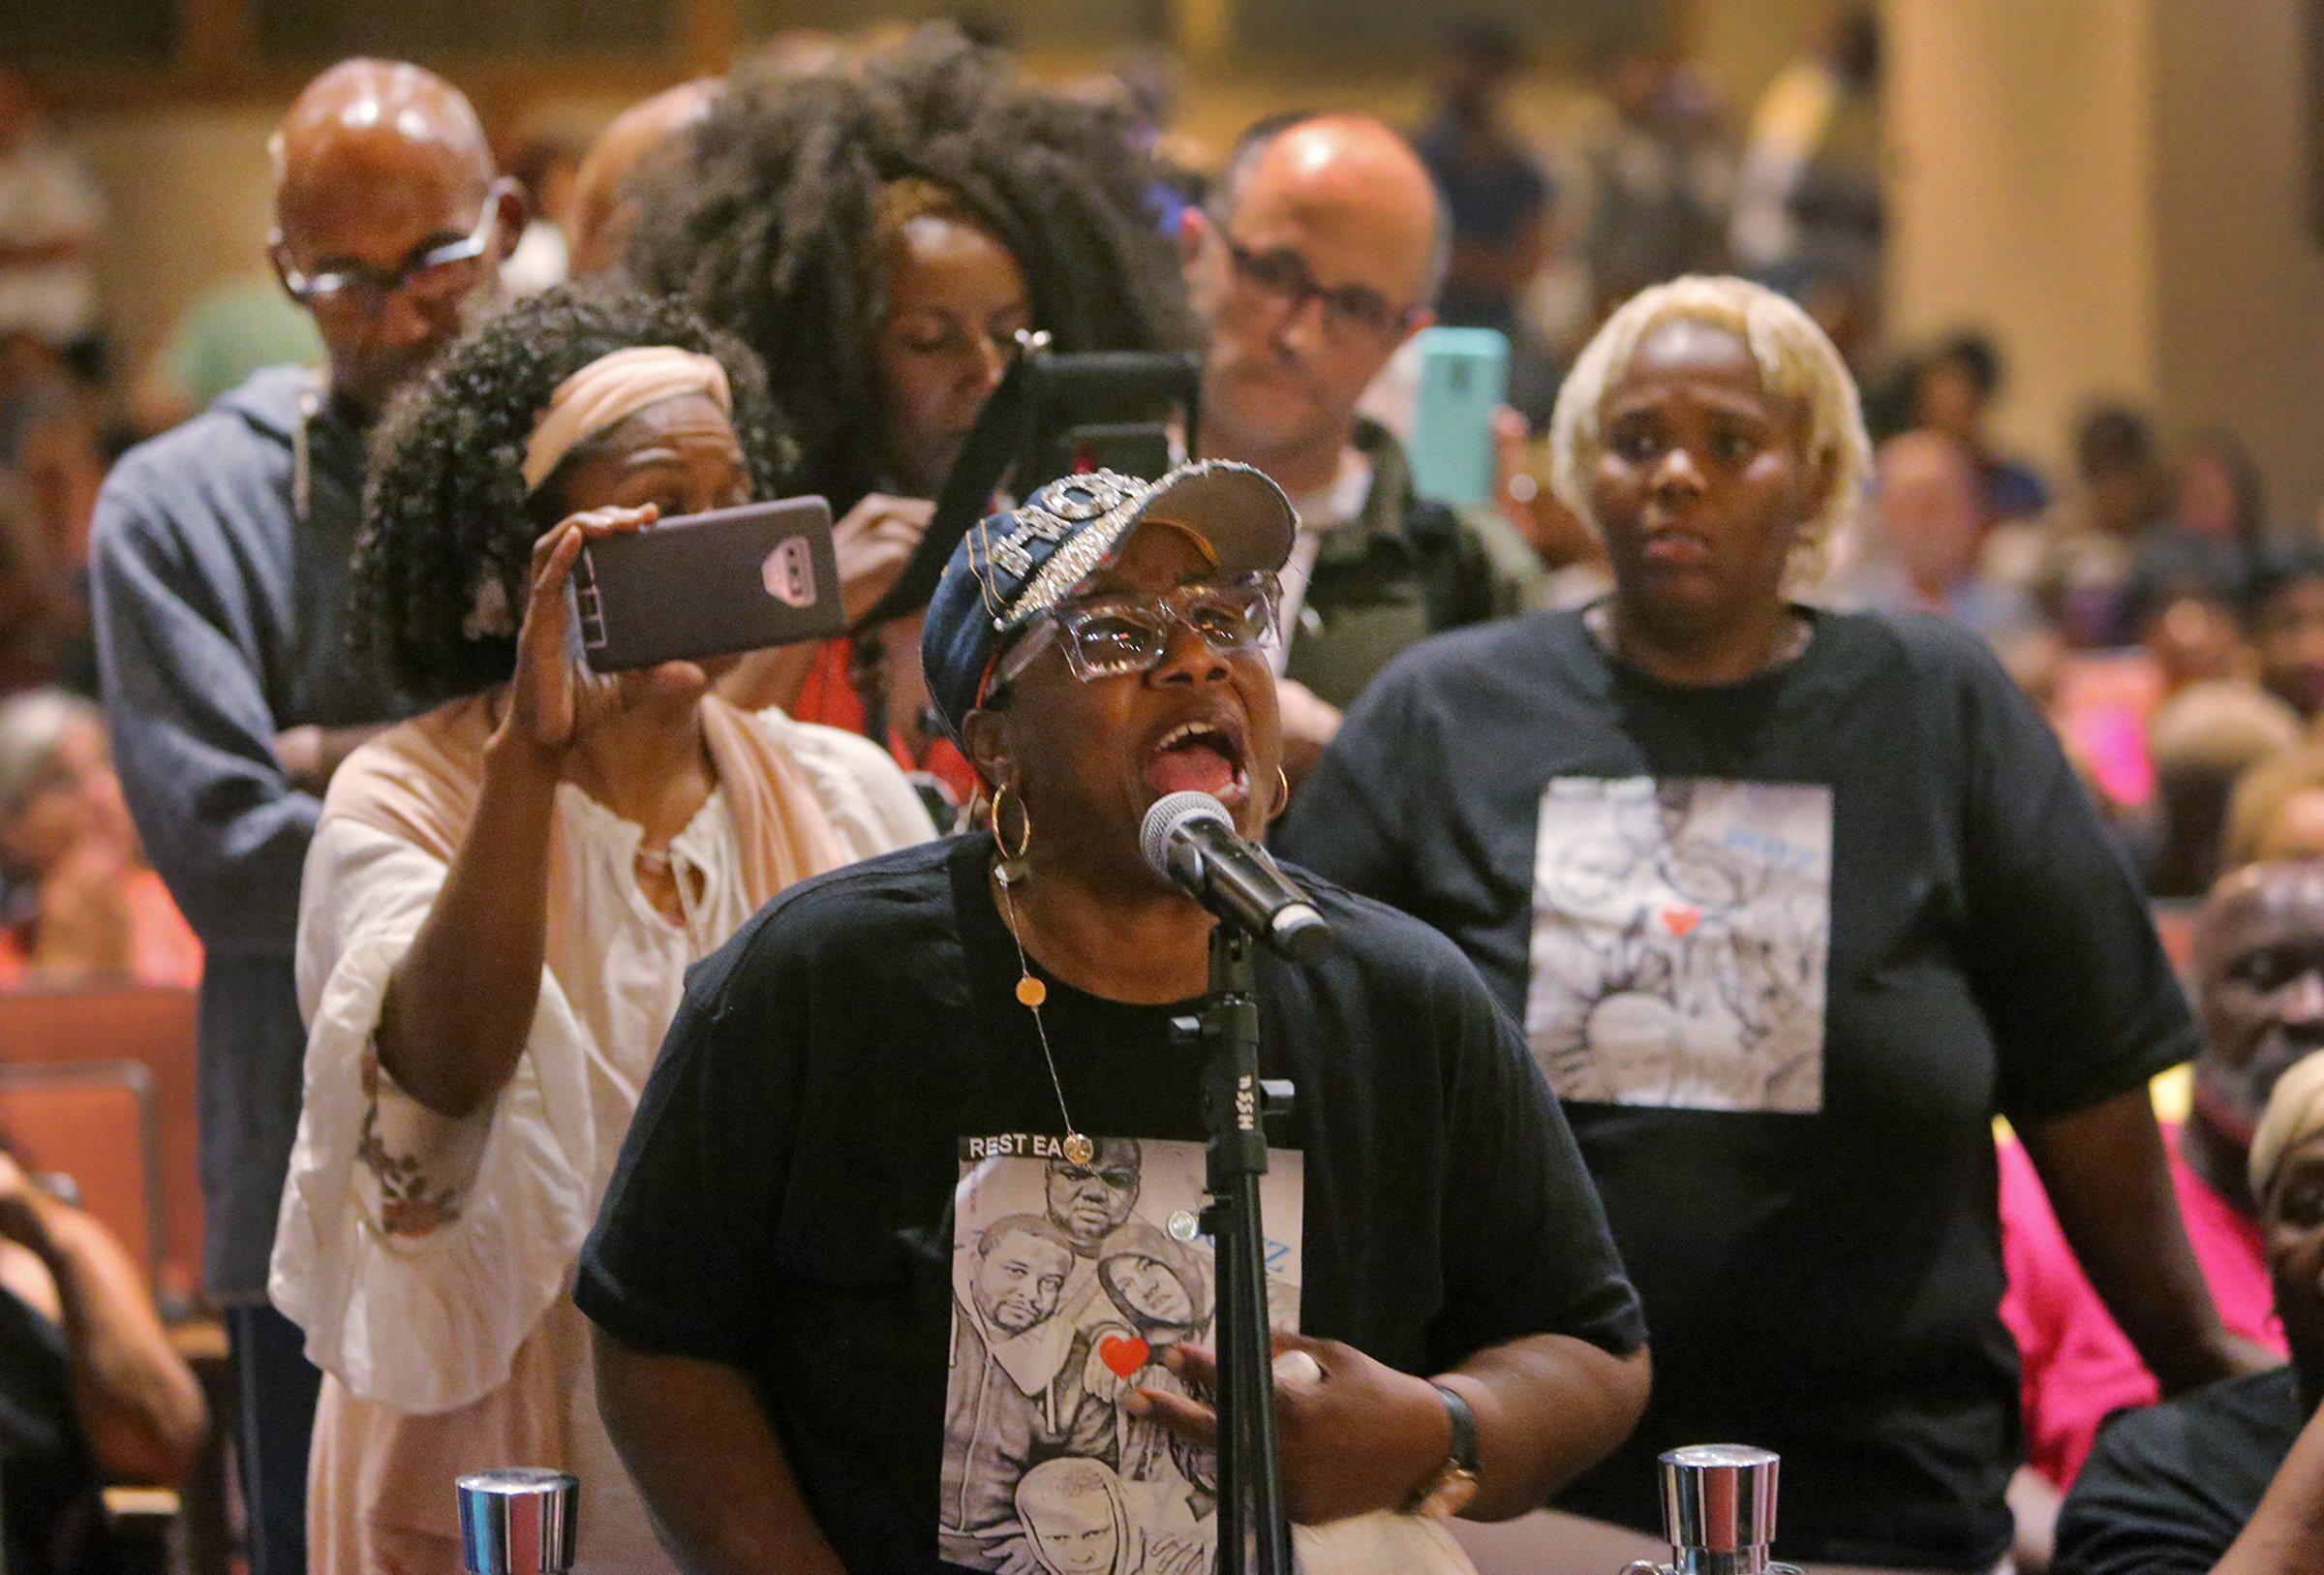 "My heart hurts," said Evelyn Sutton, 68, the first person in line to talk to the panel at the urgent Town Hall Meeting on Gun Violence at Harris-Stowe State University, on Wednesday, Aug. 28, 2019, in St. Louis. Sutton said she lost four relatives - two grandchildren and two nephews to gun violence. She said she hurts for all of the victims of gun violence. (J.B. Forbes—AP)